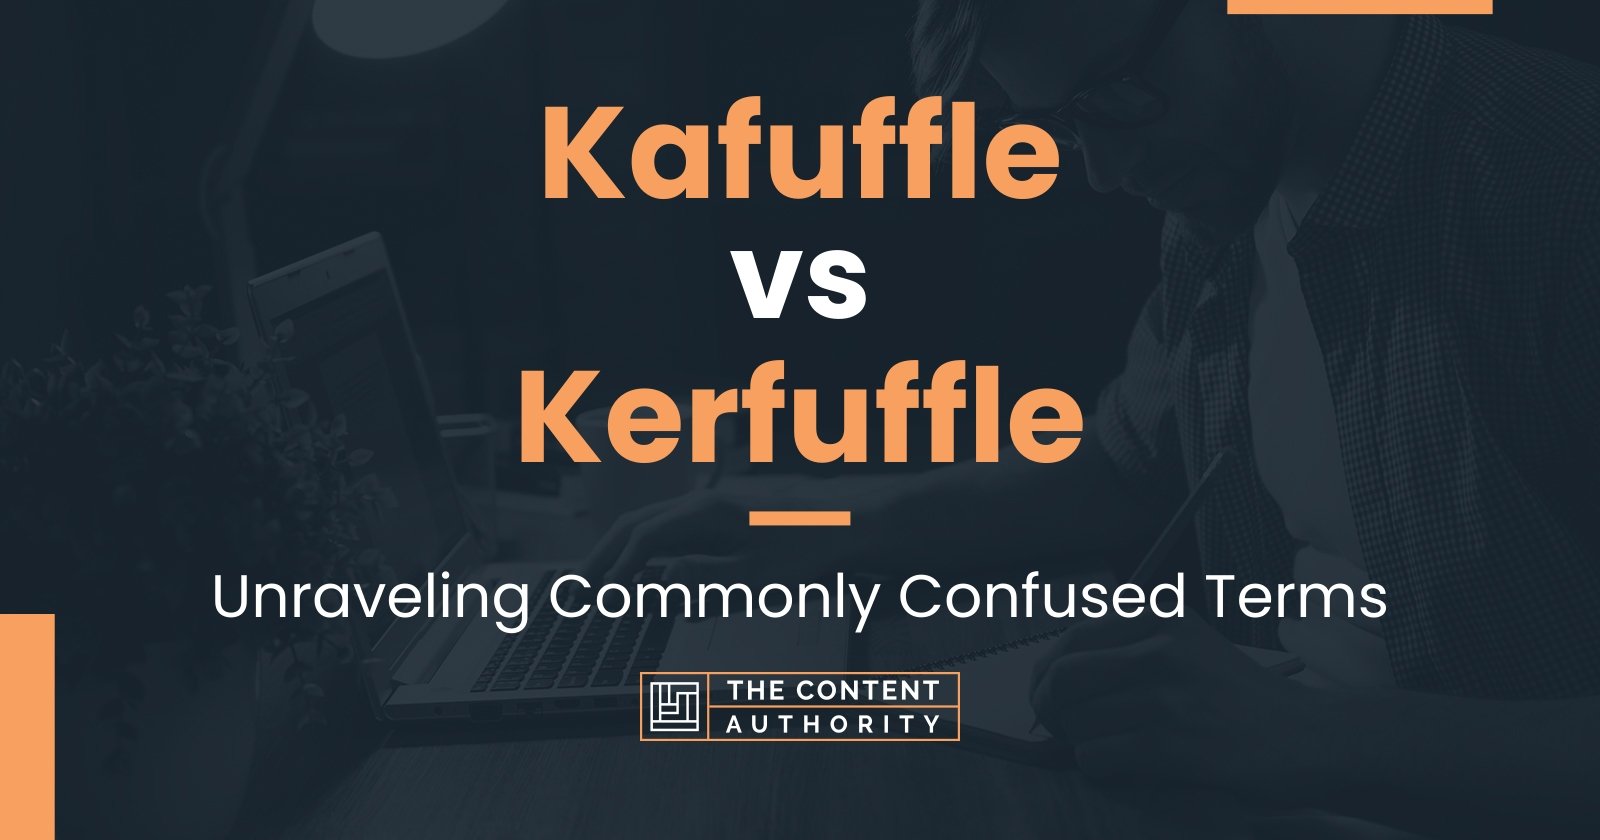 Kafuffle vs Kerfuffle: Unraveling Commonly Confused Terms